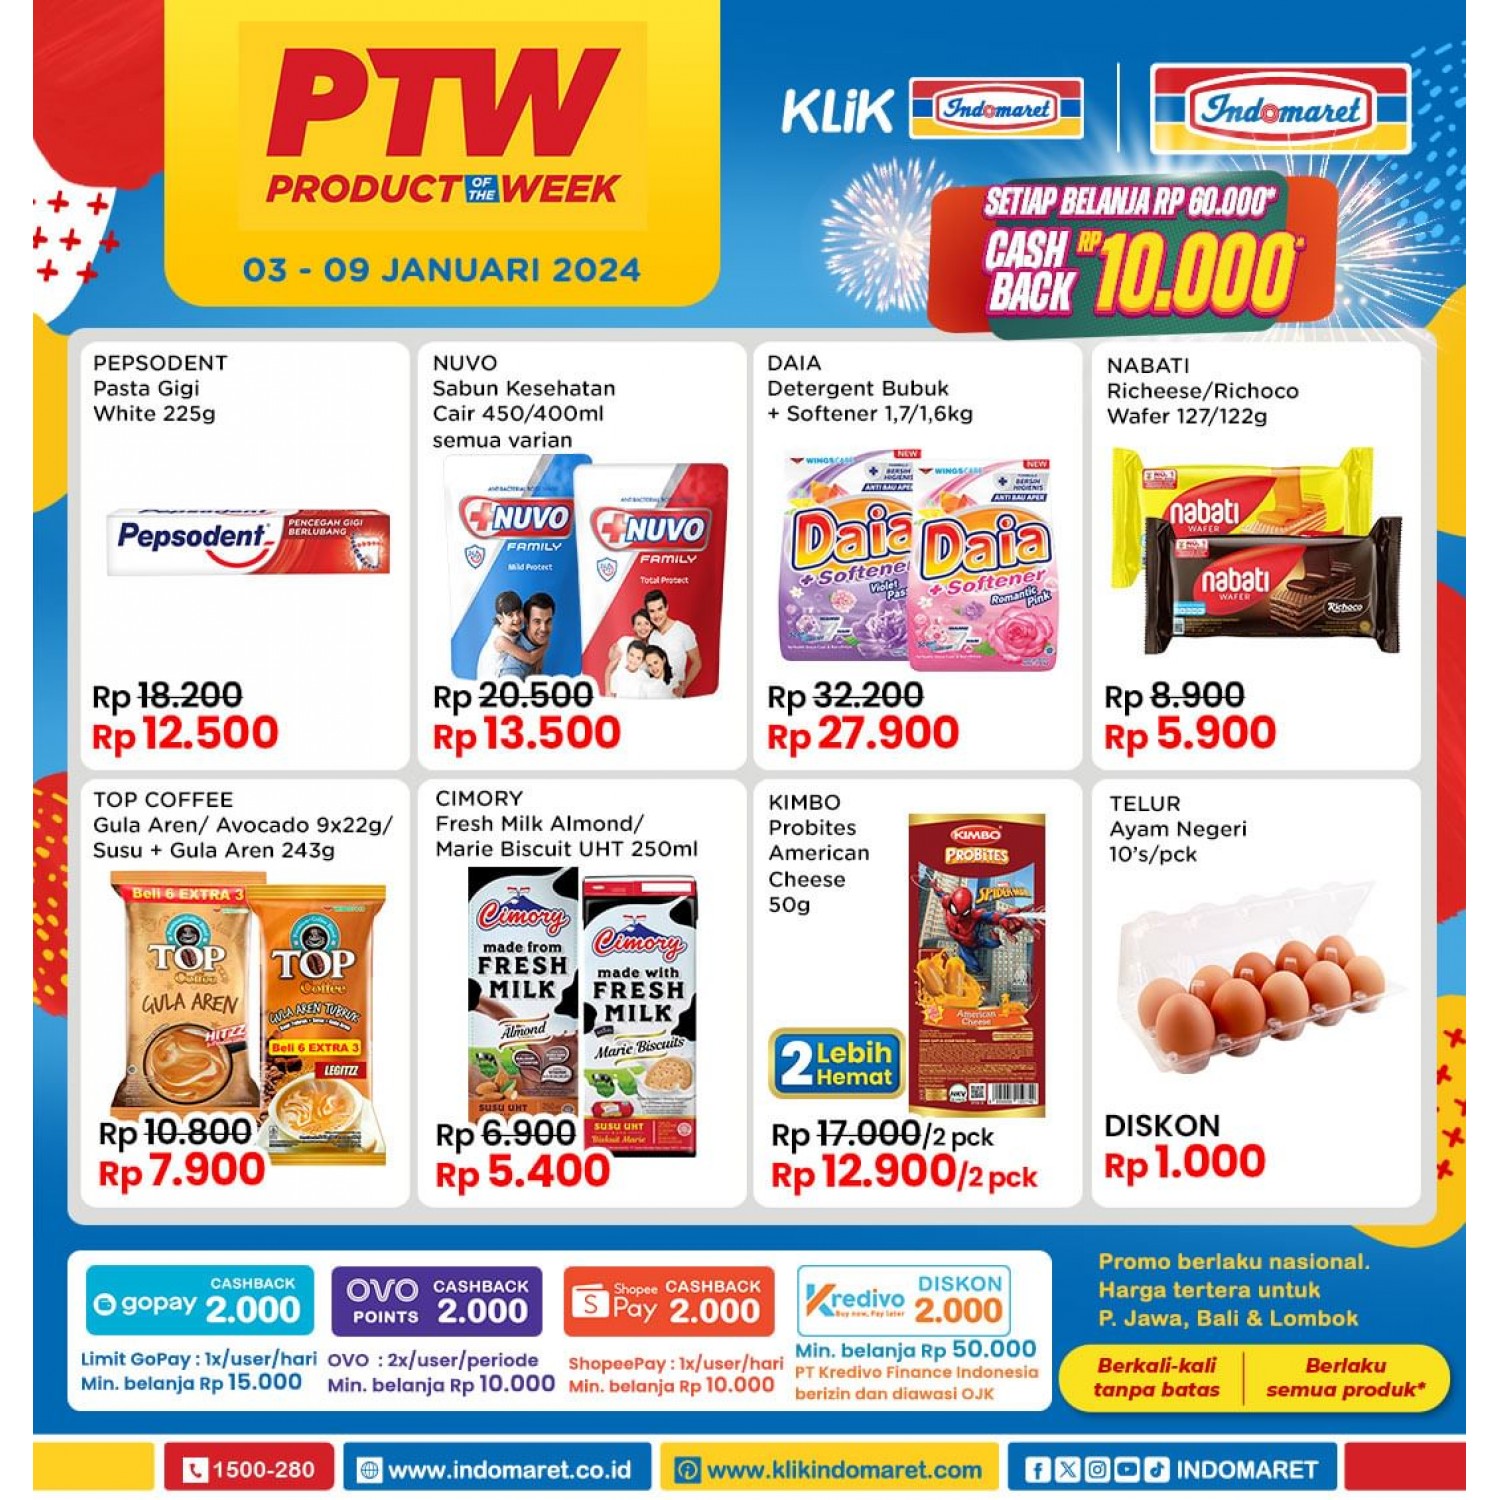 PRODUCT OF THE WEEK INDOMARET